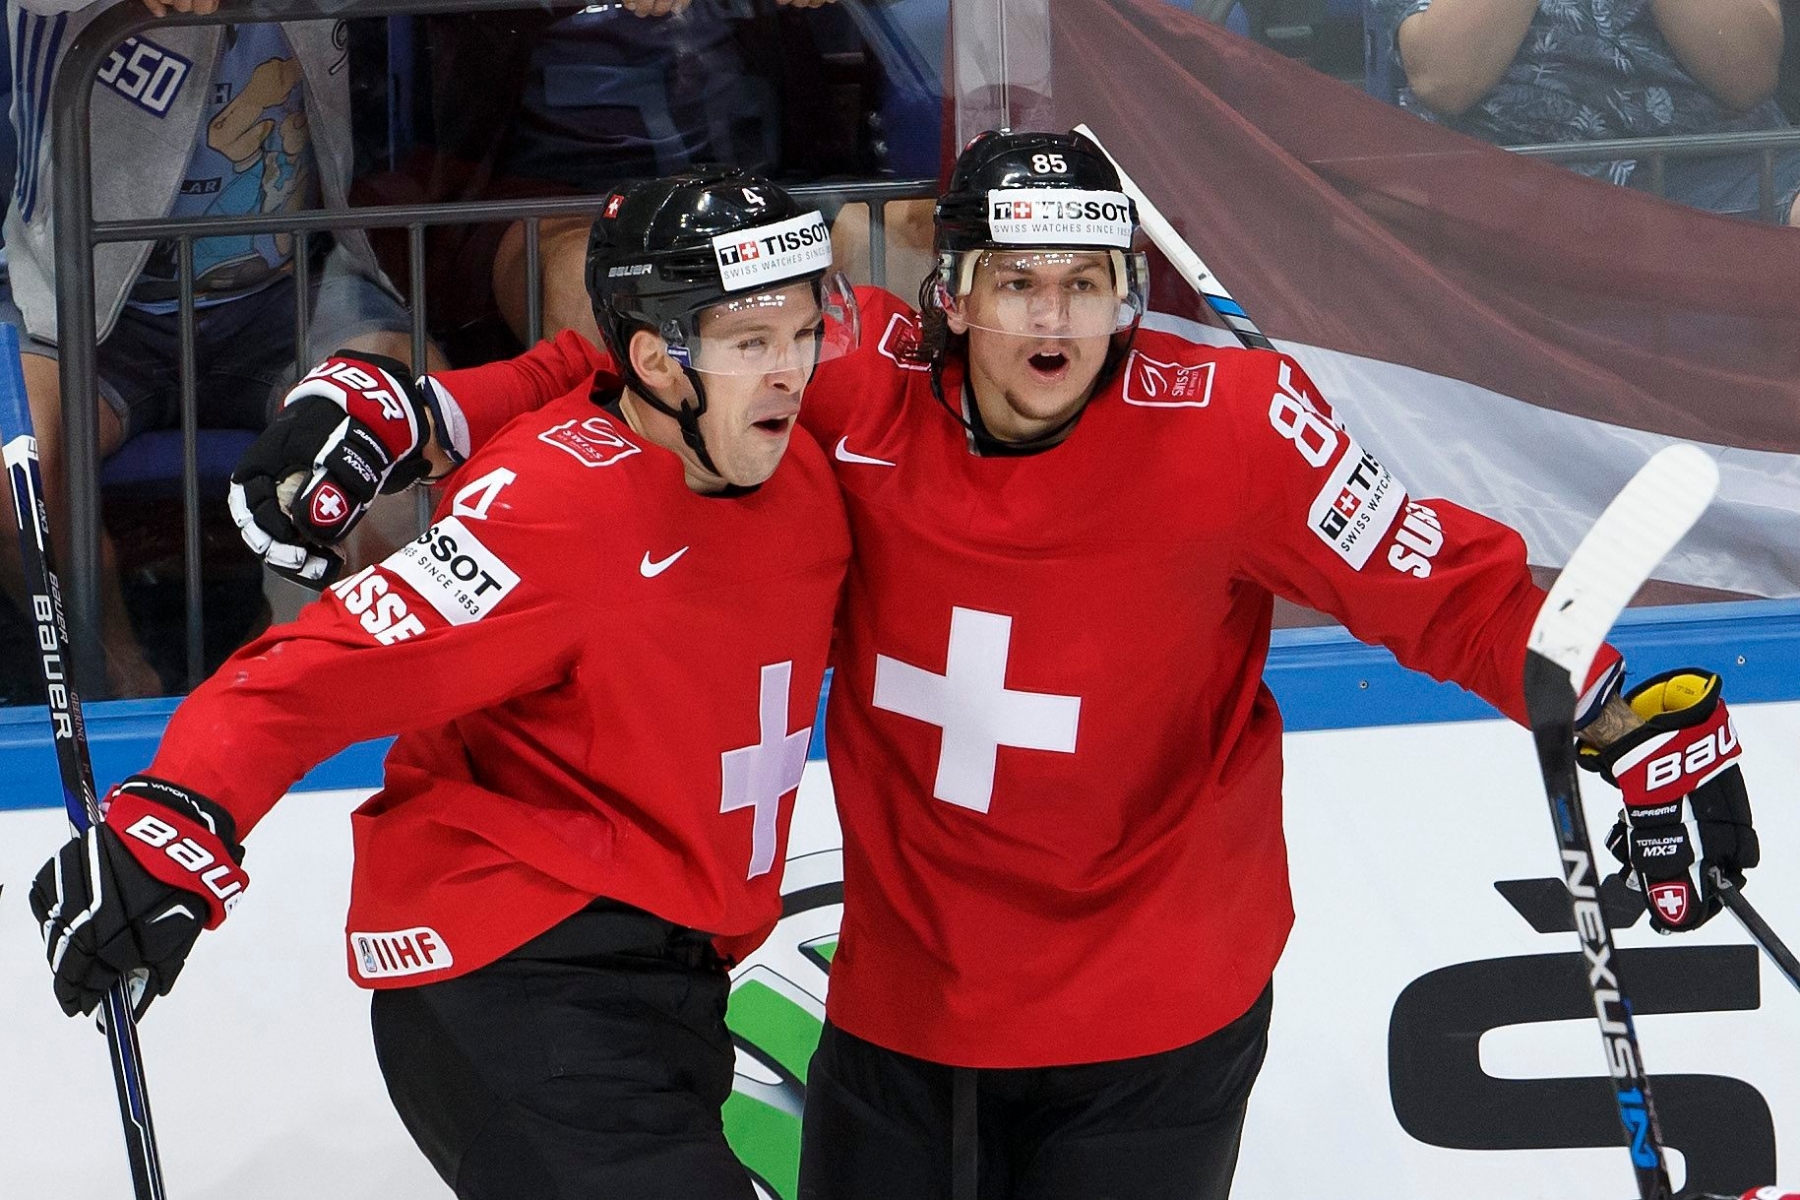 Switzerland's Sven Andrighetto, right, celebrates his goal with teammate Patrick Geering, right, after scoring the 4:3, during the IIHF 2016 World Championship preliminary round game between Switzerland and Latvia, at the Ice Palace, in Moscow, Russia, Wednesday, May 11, 2016. (KEYSTONE/Salvatore Di Nolfi) RUSSIA ICE HOCKEY IIHF WC 2016 CHE LAT